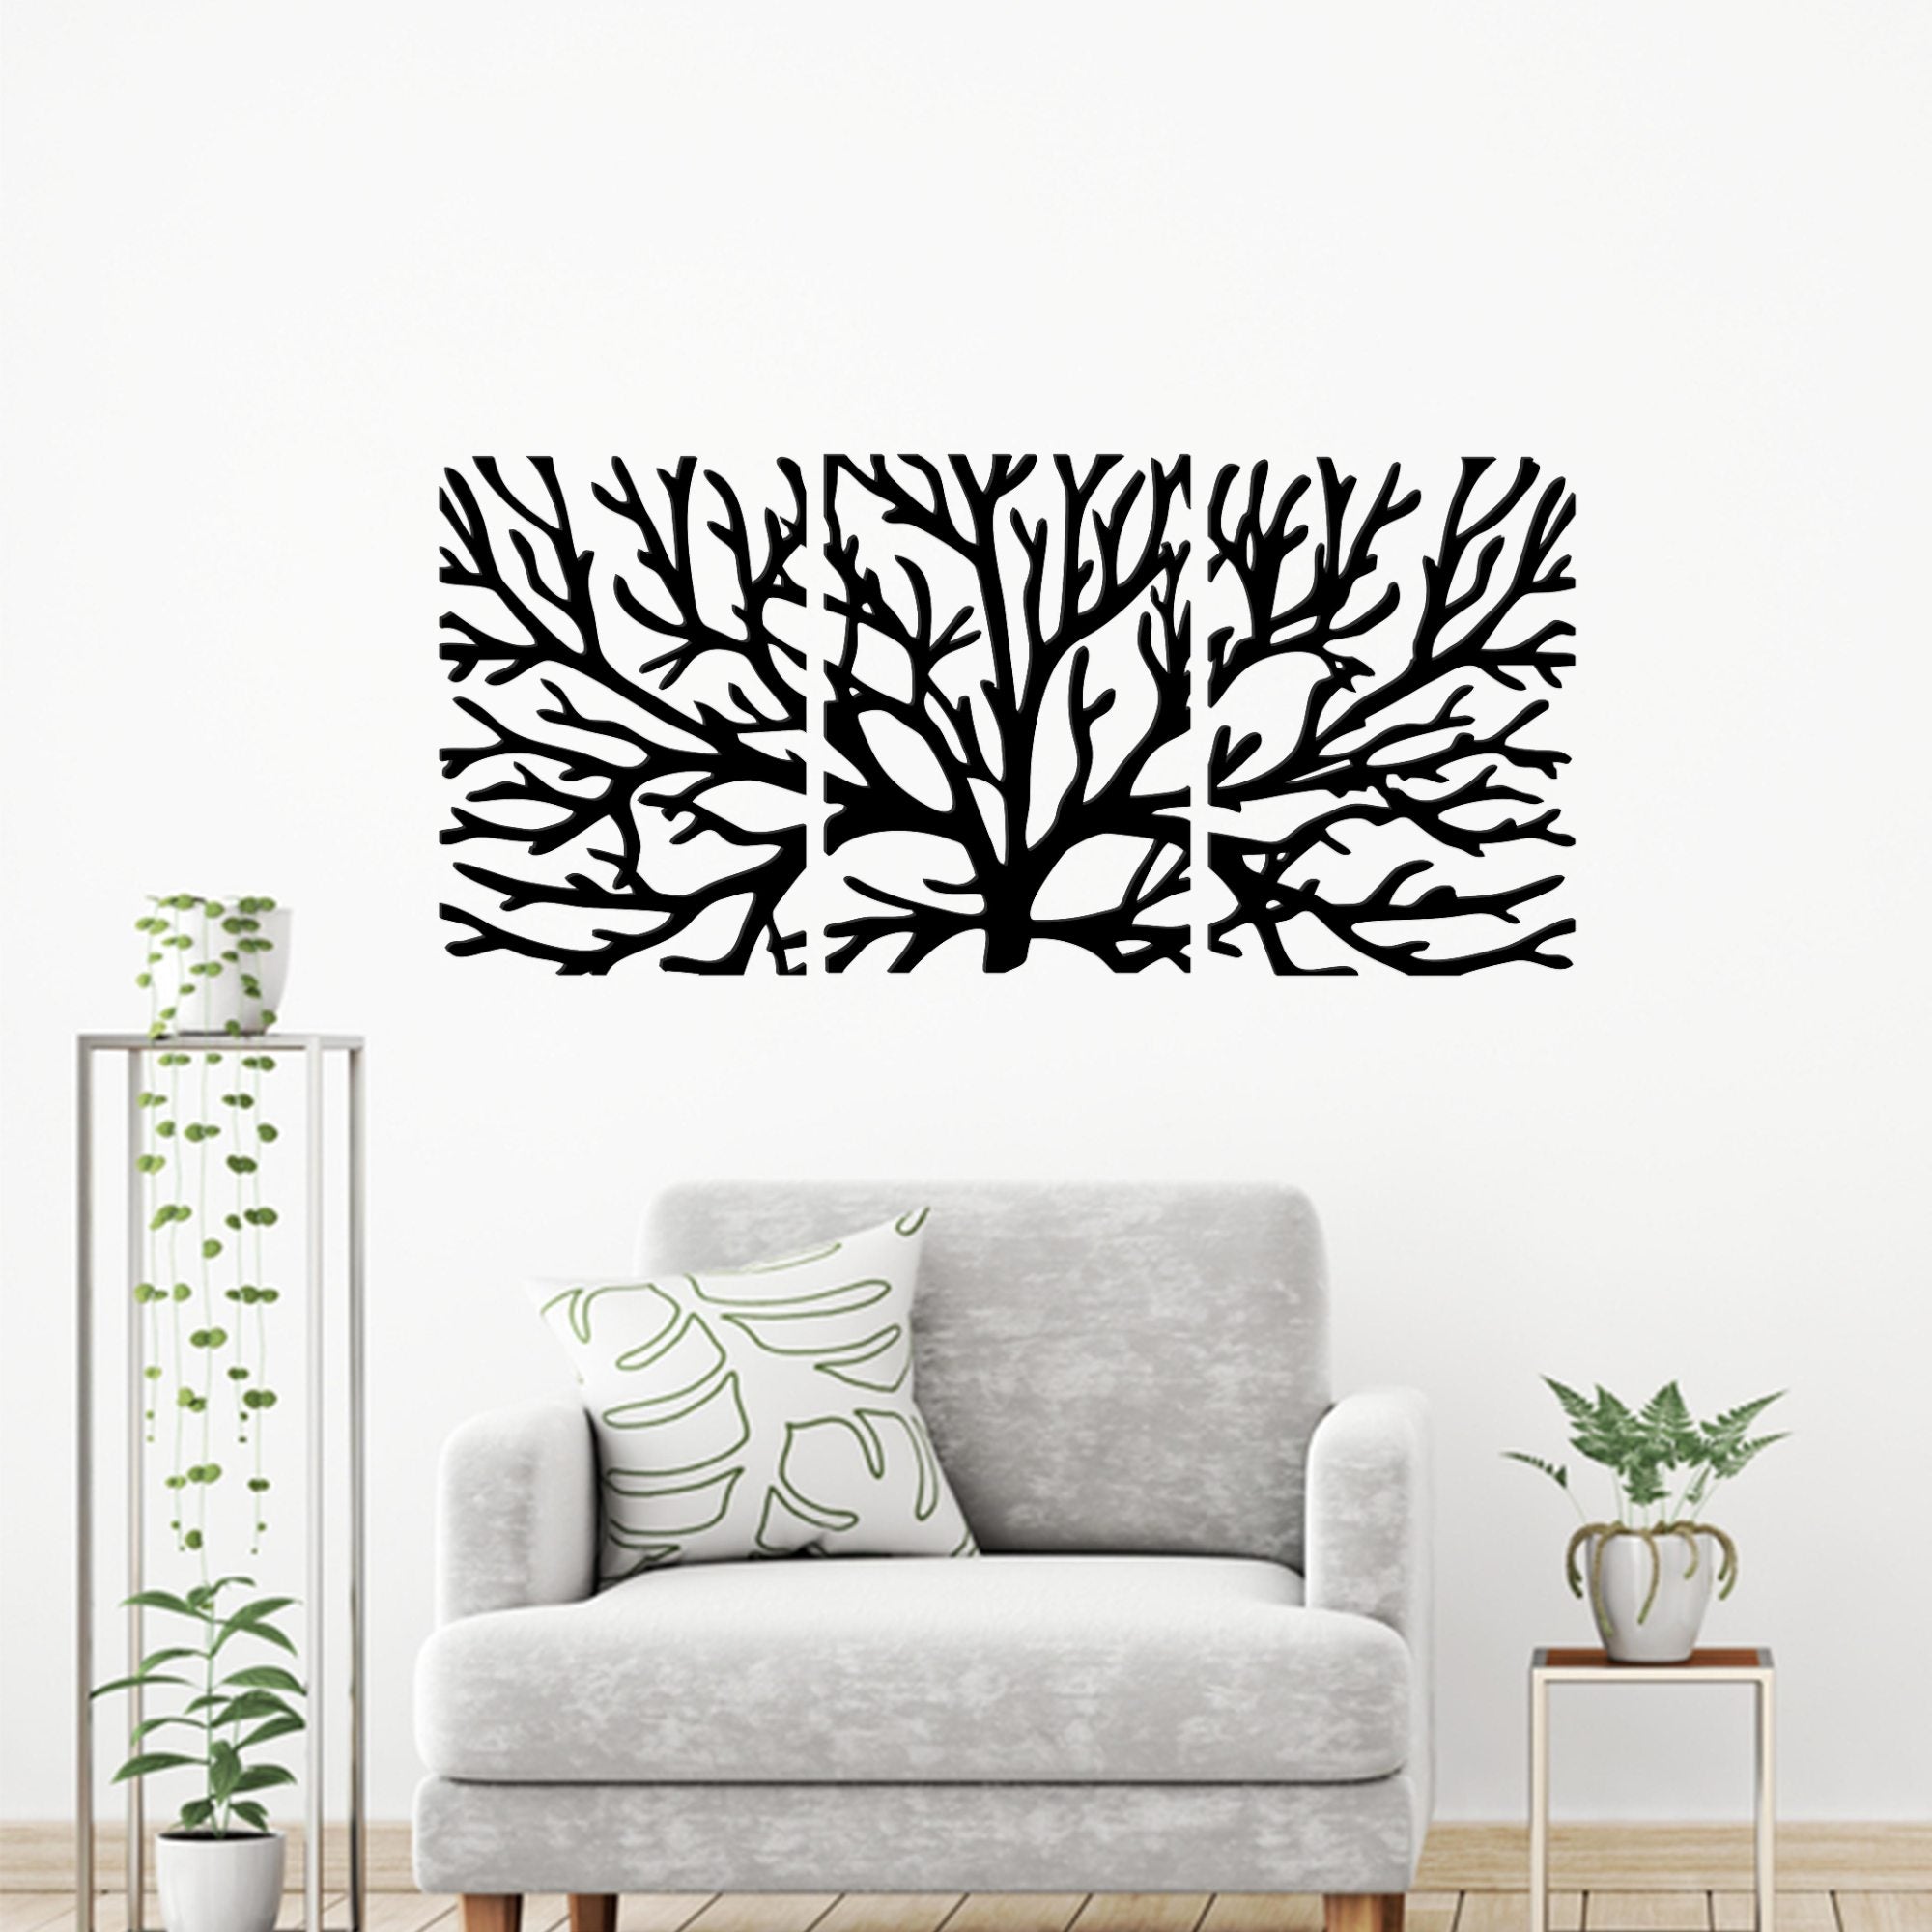 Premium Quality Wooden Wall Hanging of Beautiful Black Color Tree Branches